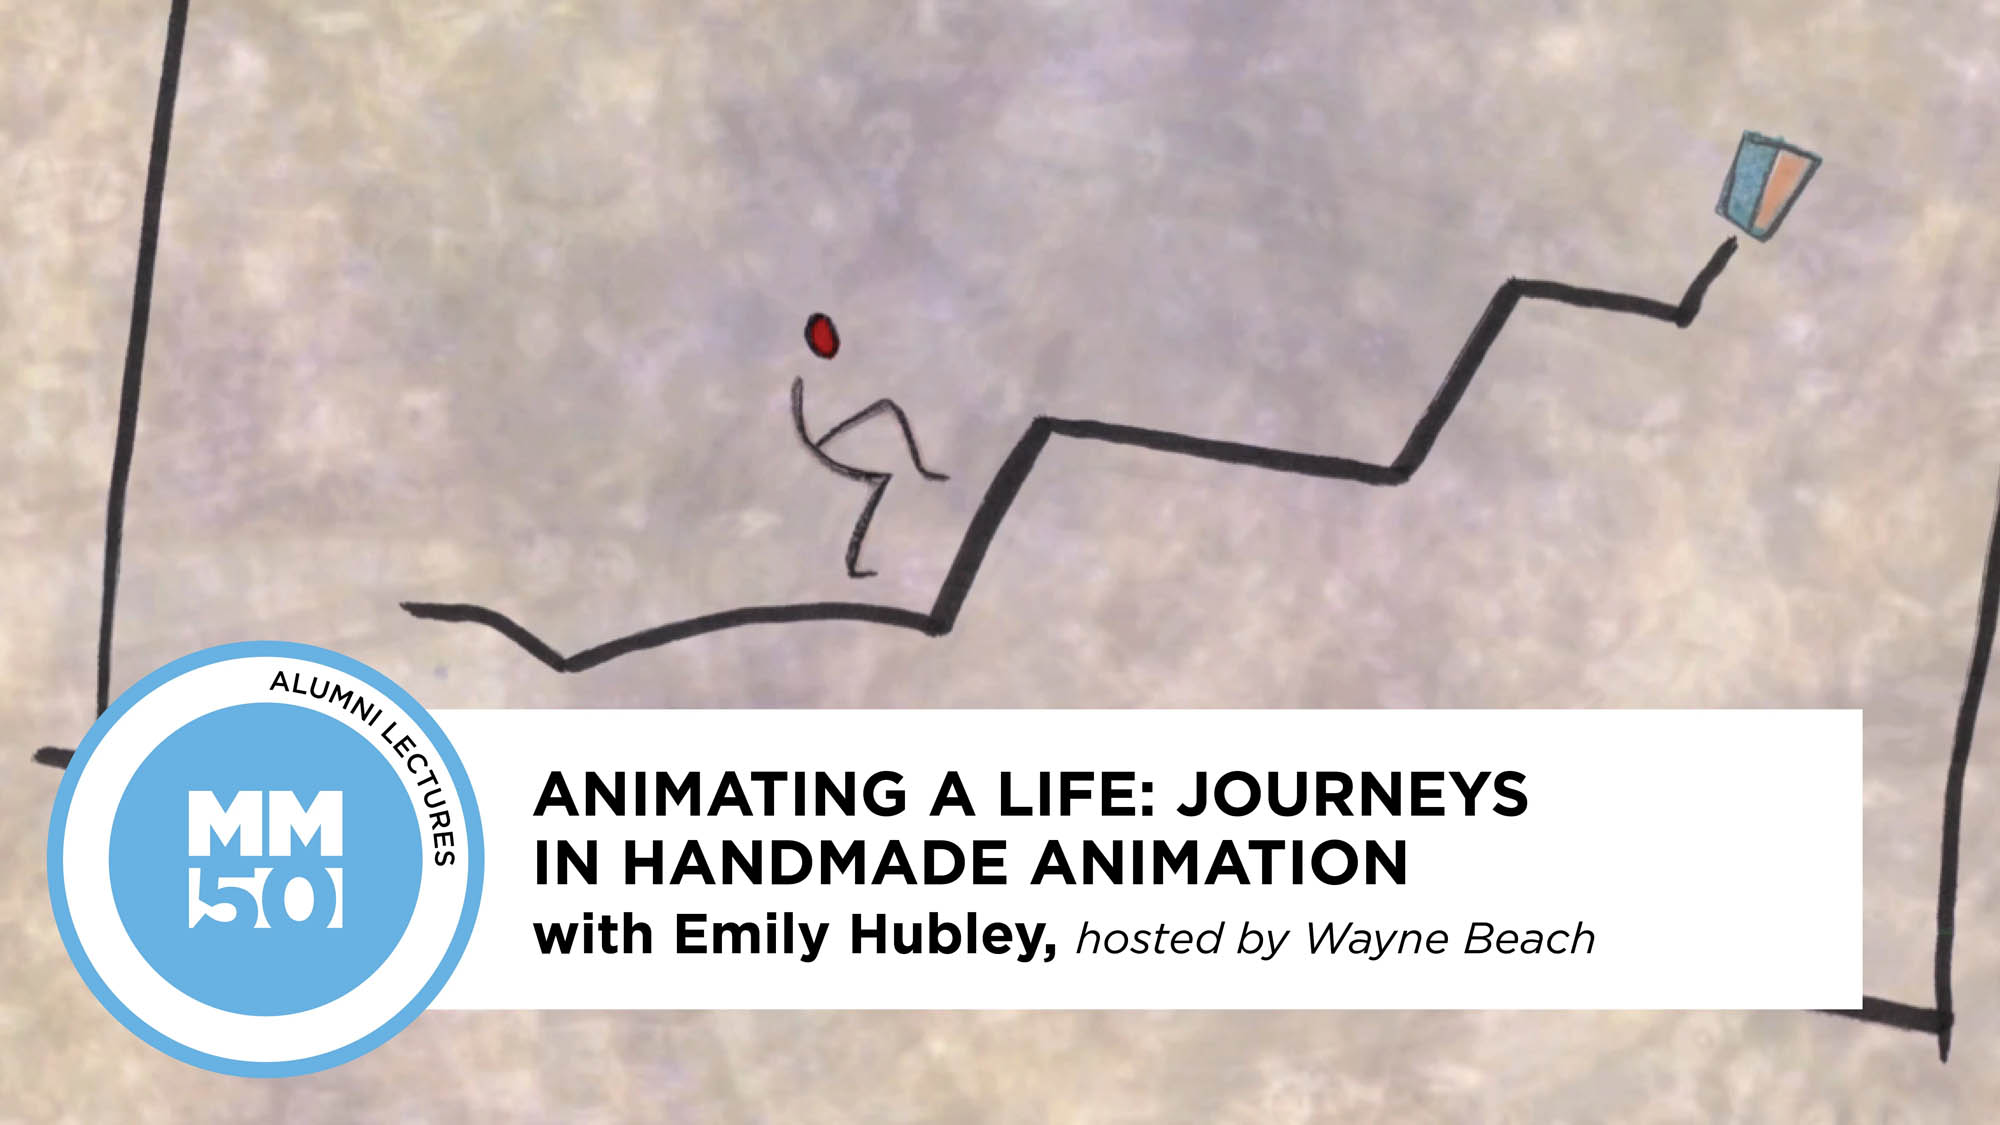 ANIMATING A LIFE - JOURNEYS IN HANDMADE ANIMATION with Emily Hubley (banner)